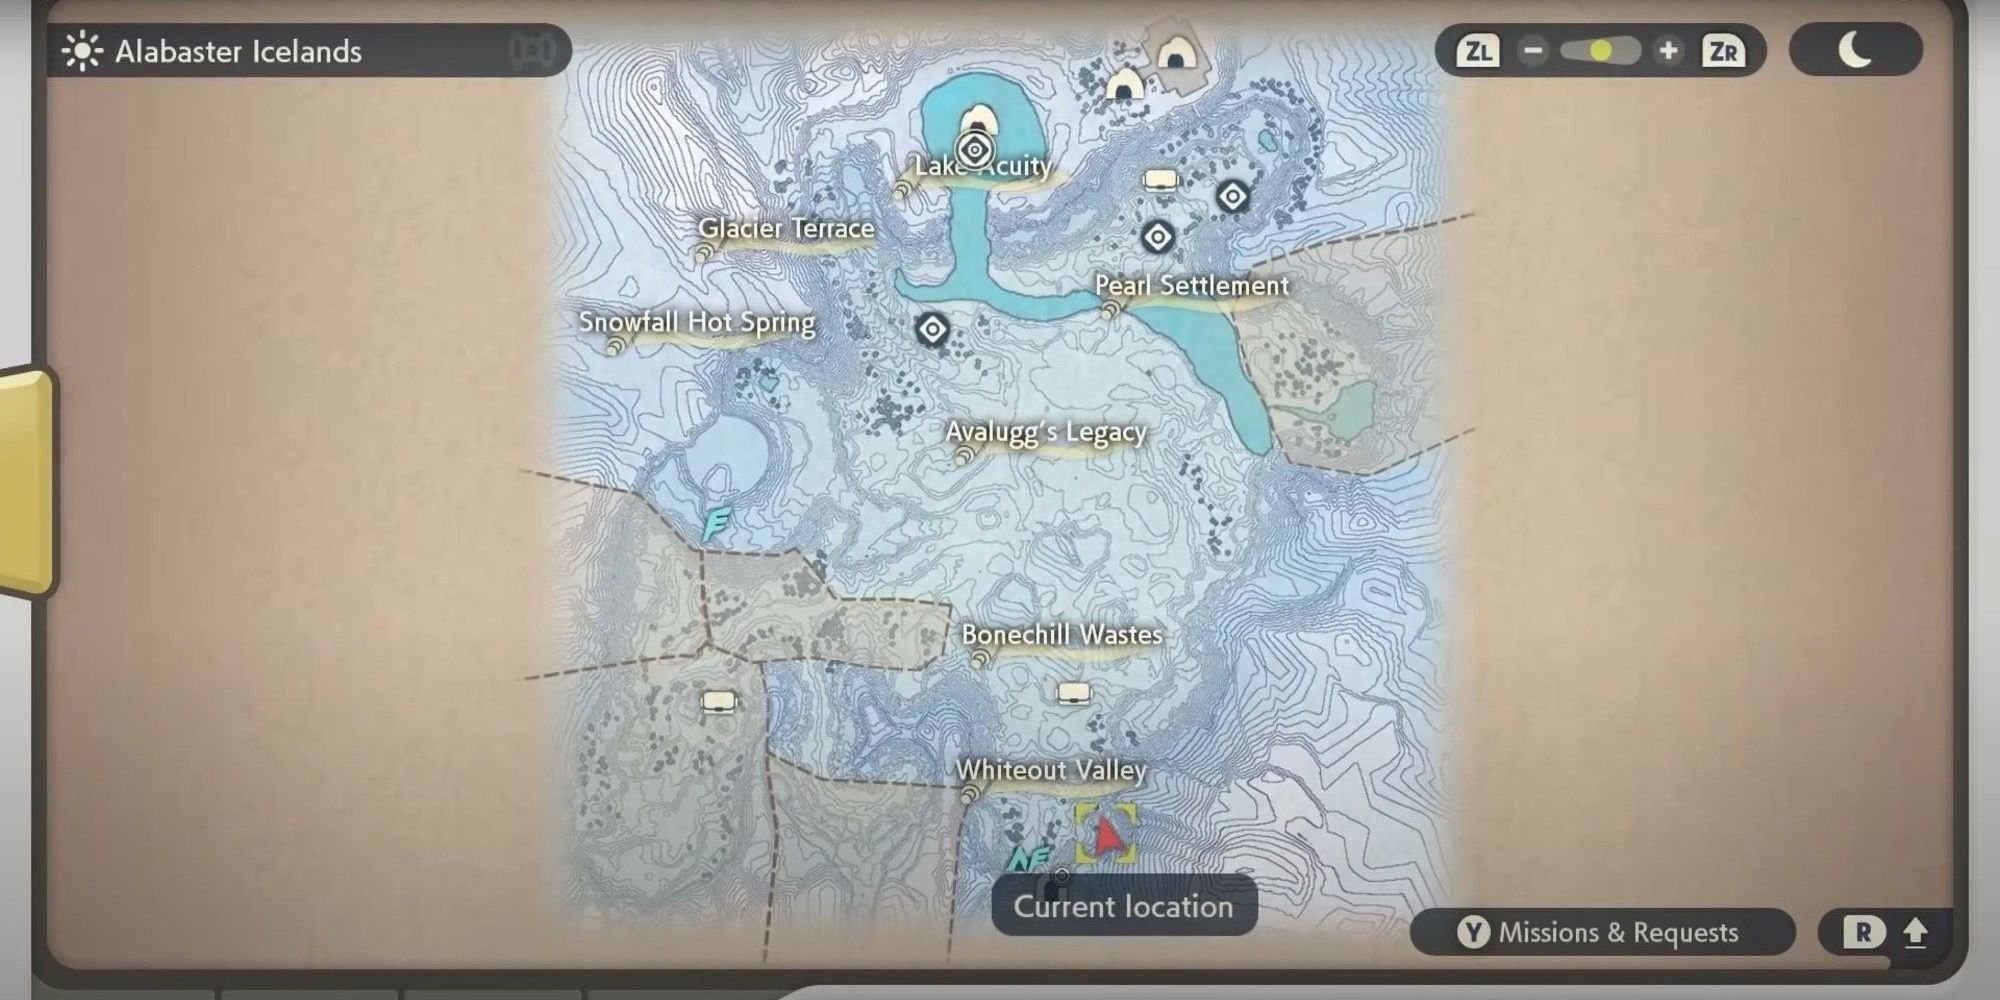 The Alabaster Icelands map showcasing the different areas the character can explore including showing their current location in this Pokemon Legends Arceus game.